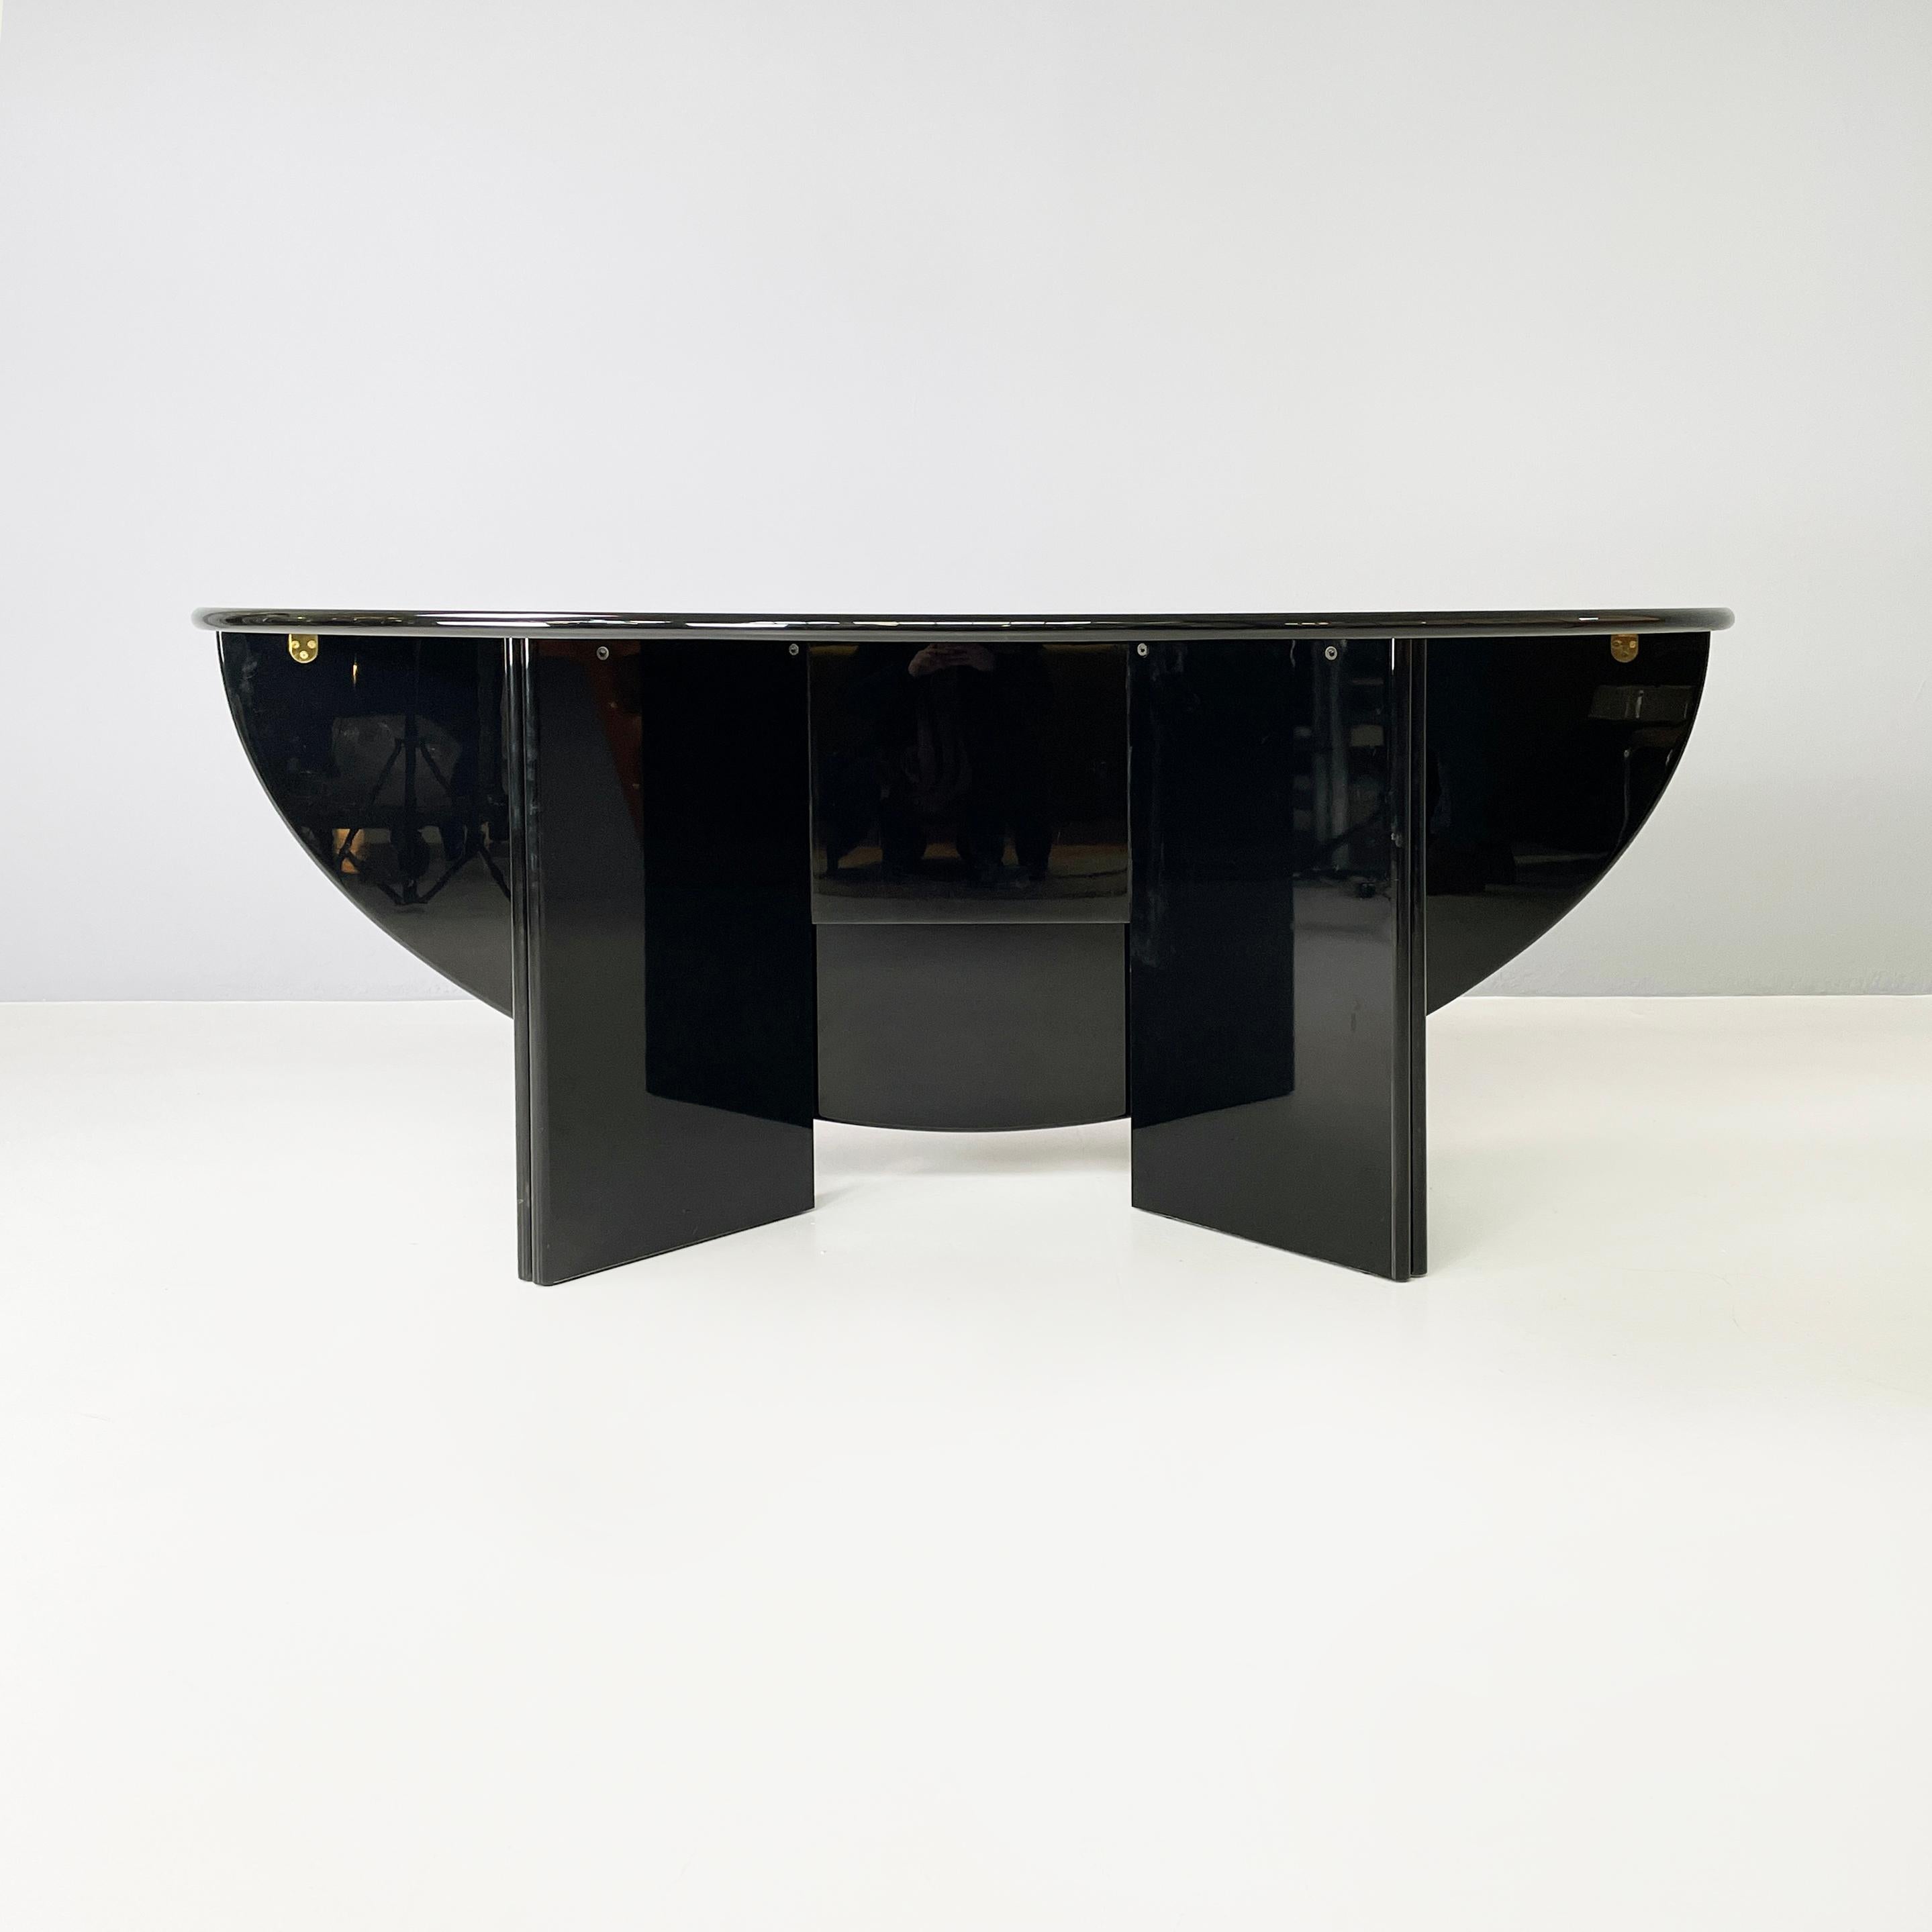 Wood Italian modern Black Dining table or console by Takahama for Cassina, 1970s